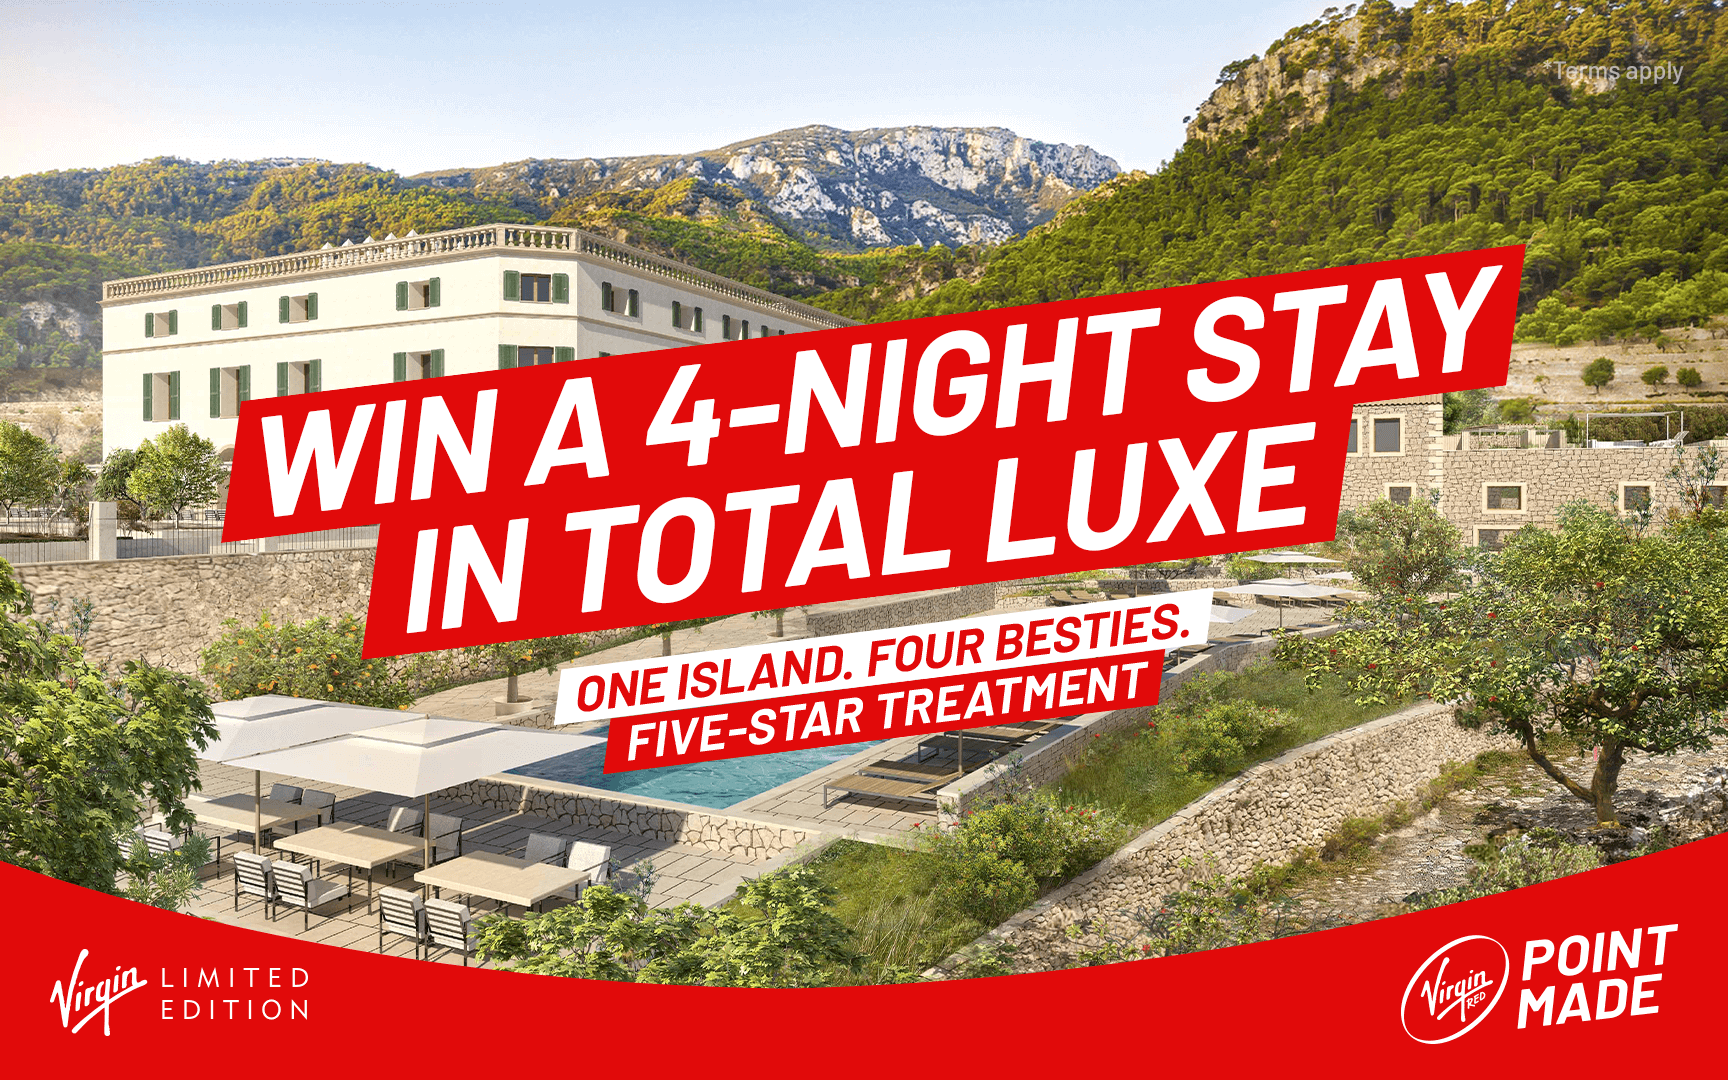 Win a 4-night luxury stay in Mallorca with Virgin